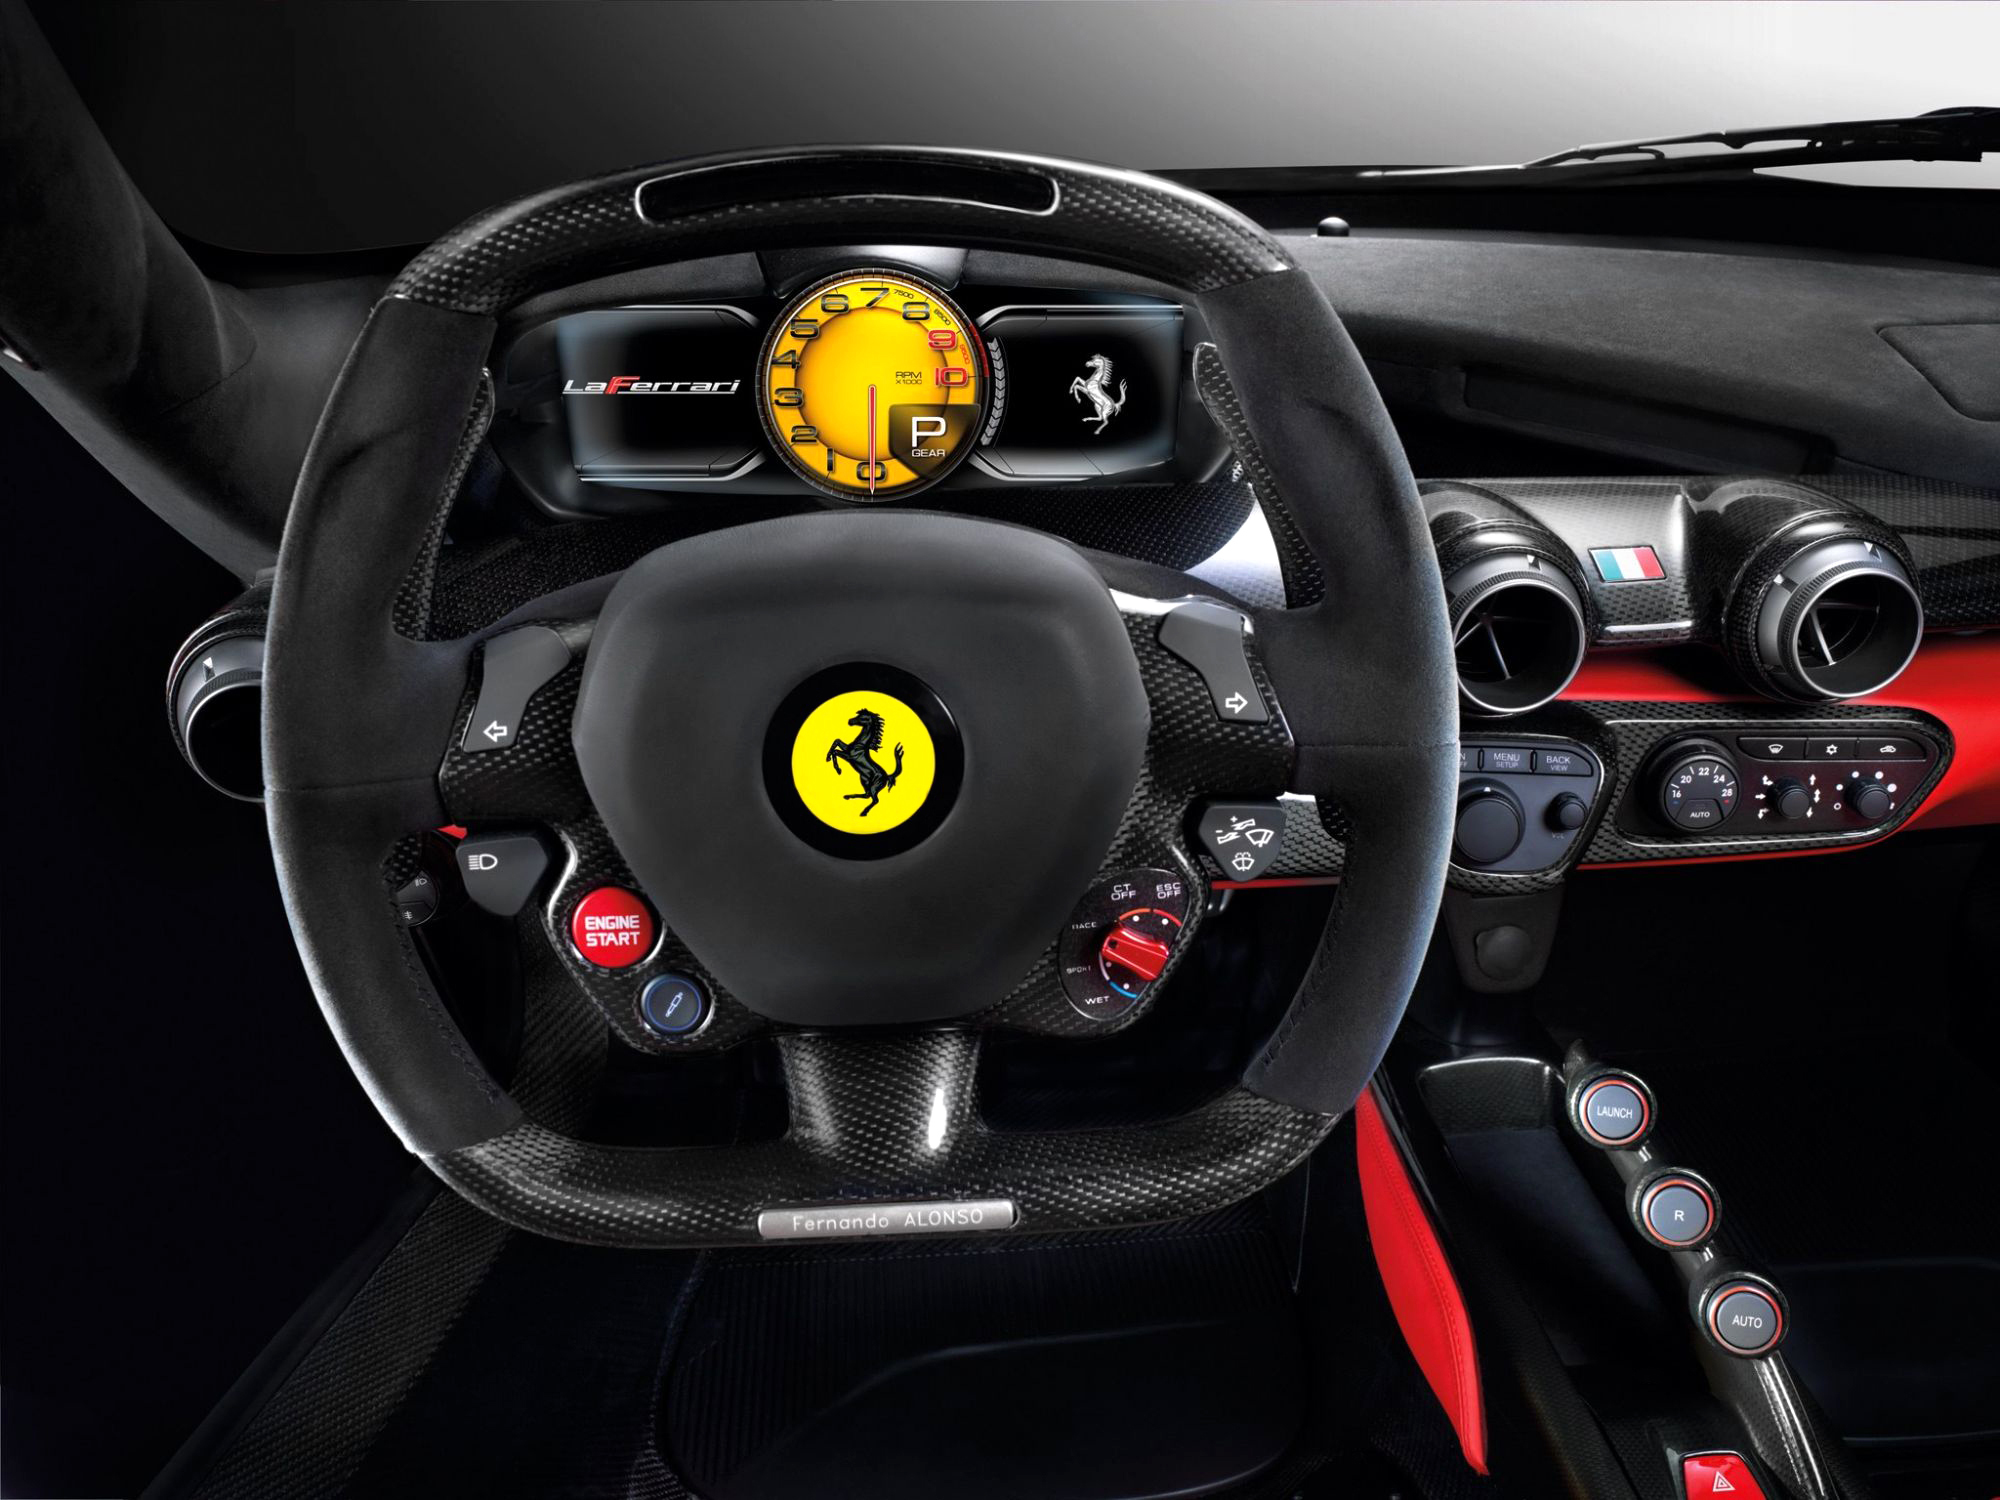 105357 Screensavers and Wallpapers Steering Wheel for phone. Download auto, ferrari, cars, steering wheel, rudder, salon, laferrari pictures for free